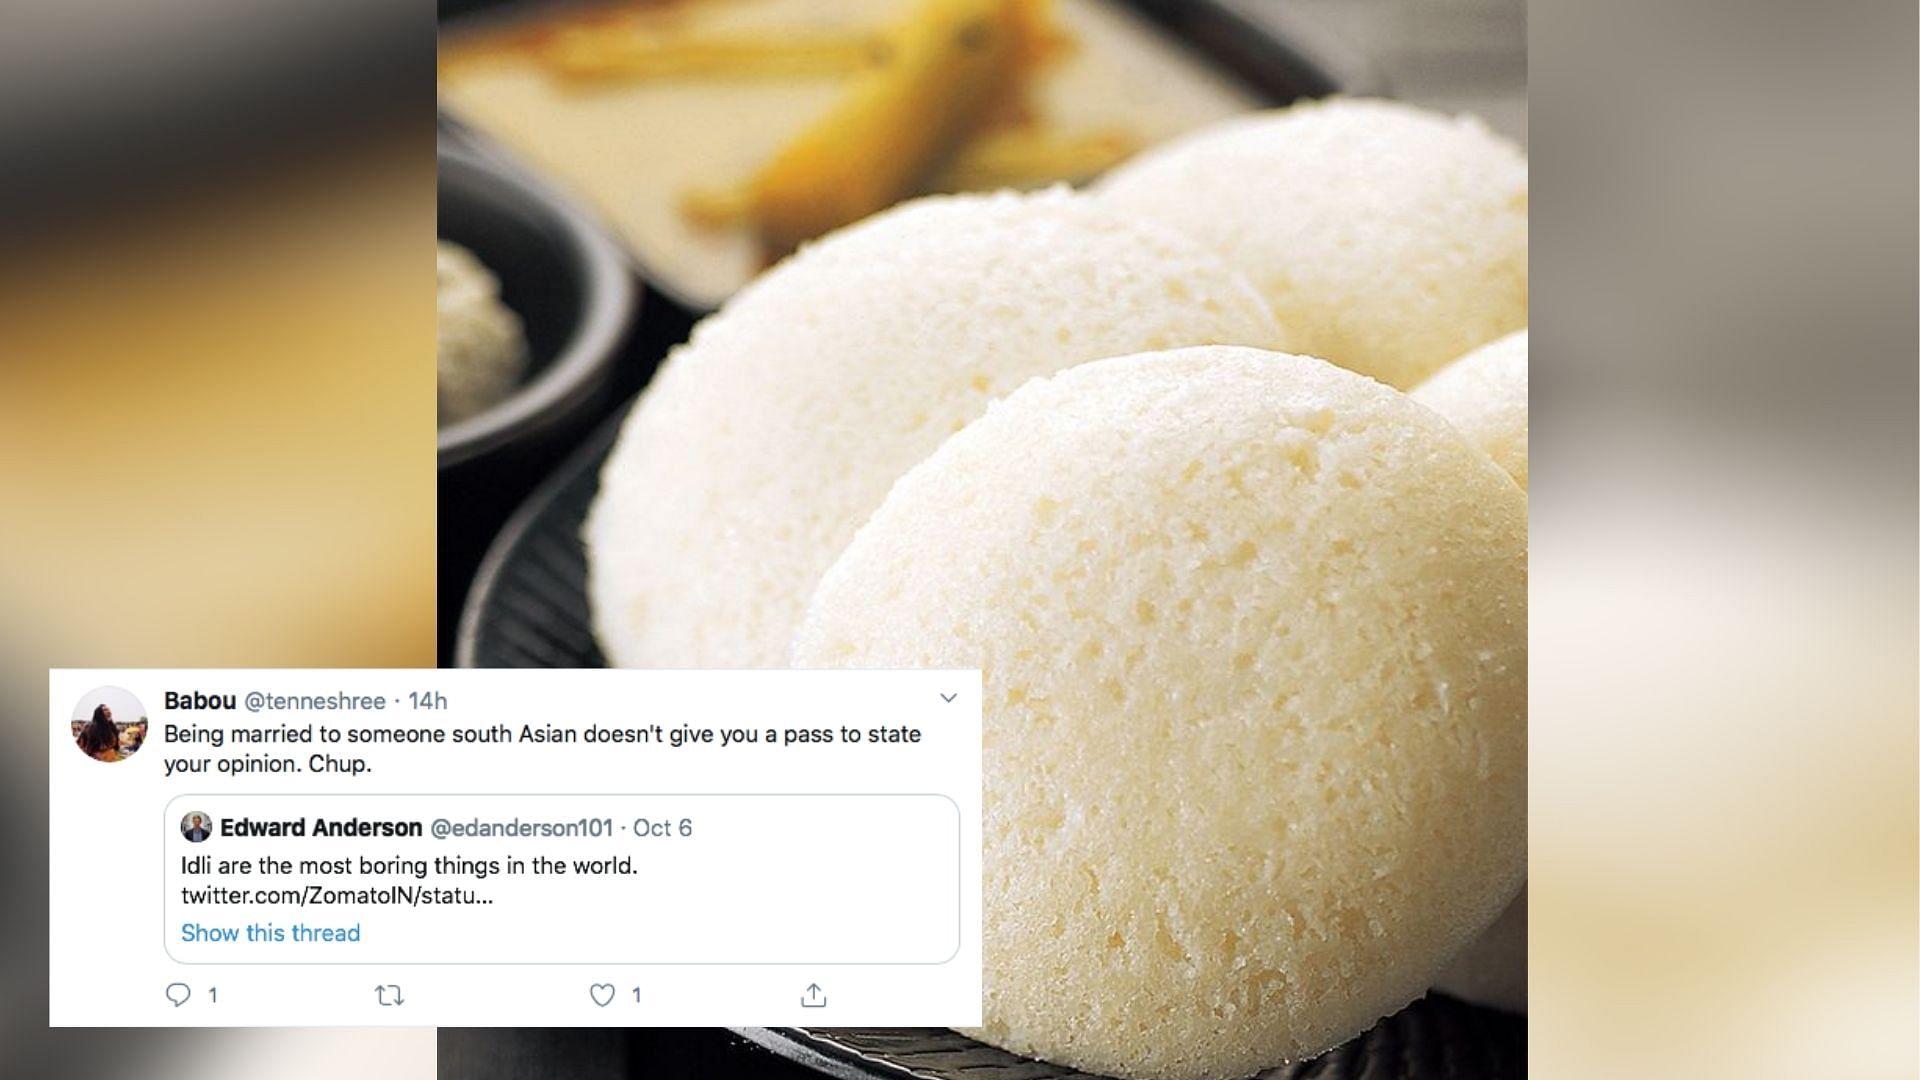 UK Professor Says 'Idlis' Are 'Boring' And All Hell Breaks Loose